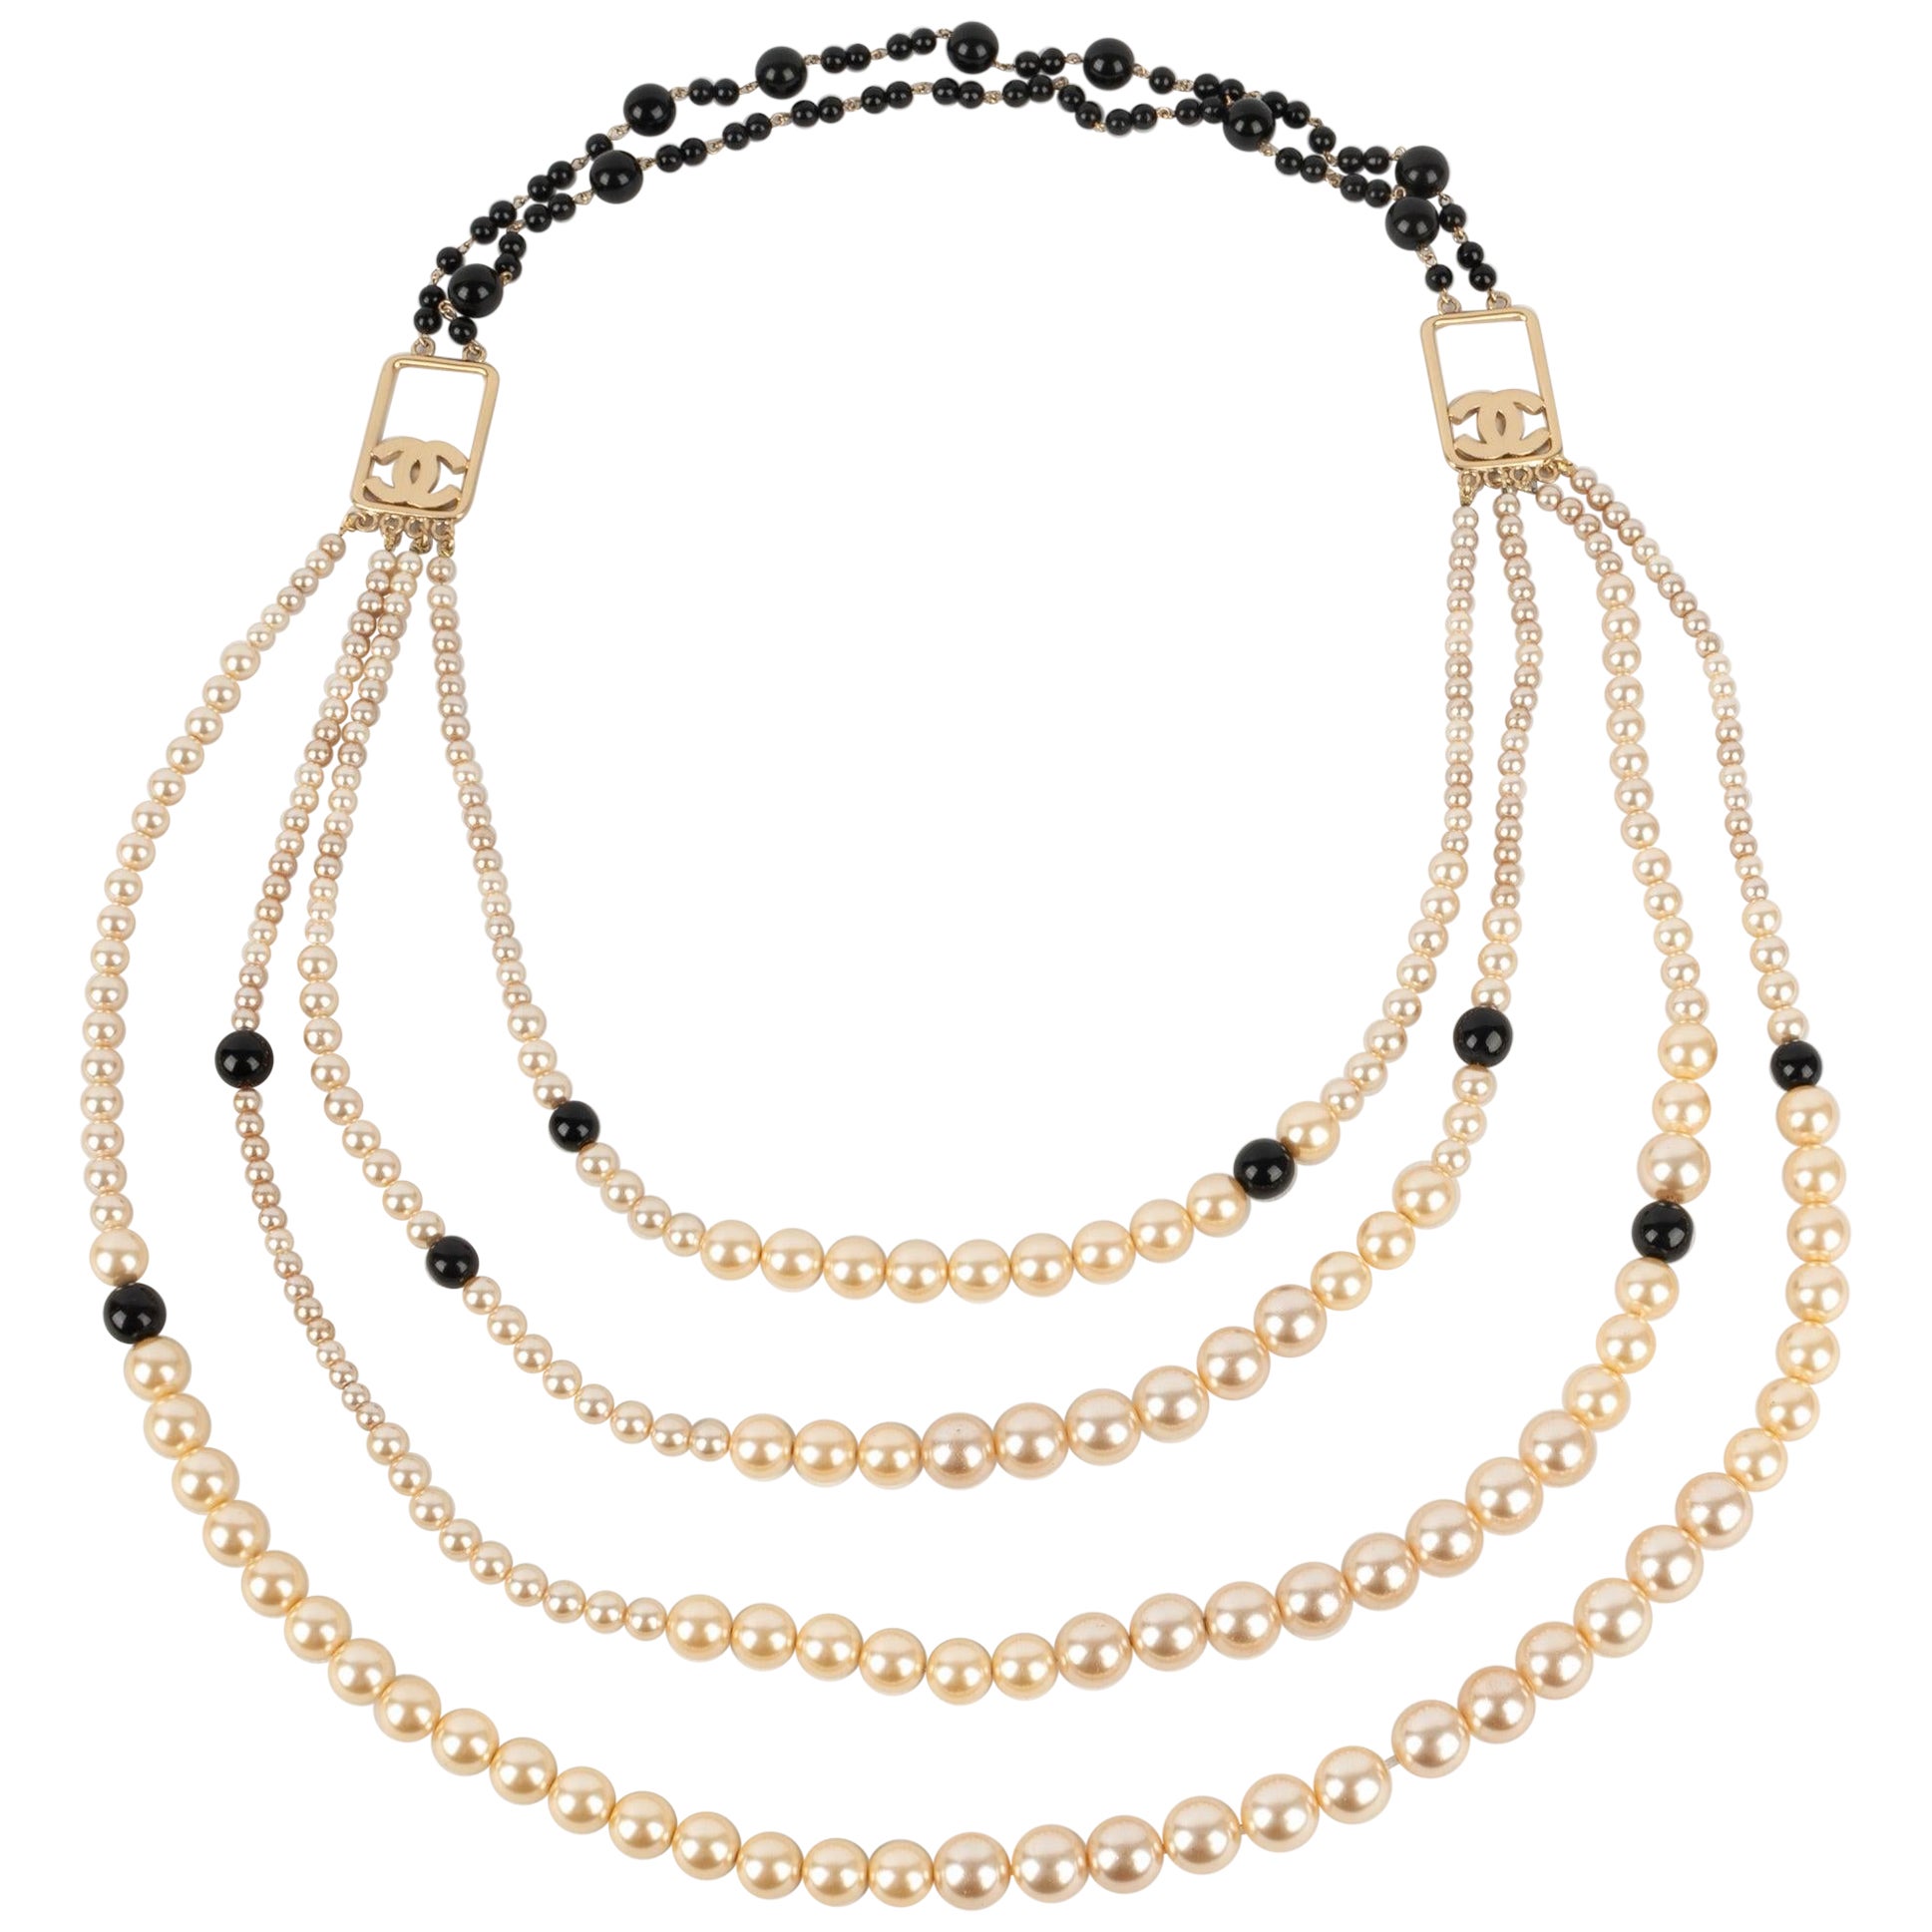 Chanel Long Necklace with Costume Pearls and Black Glass Pearls, 2003